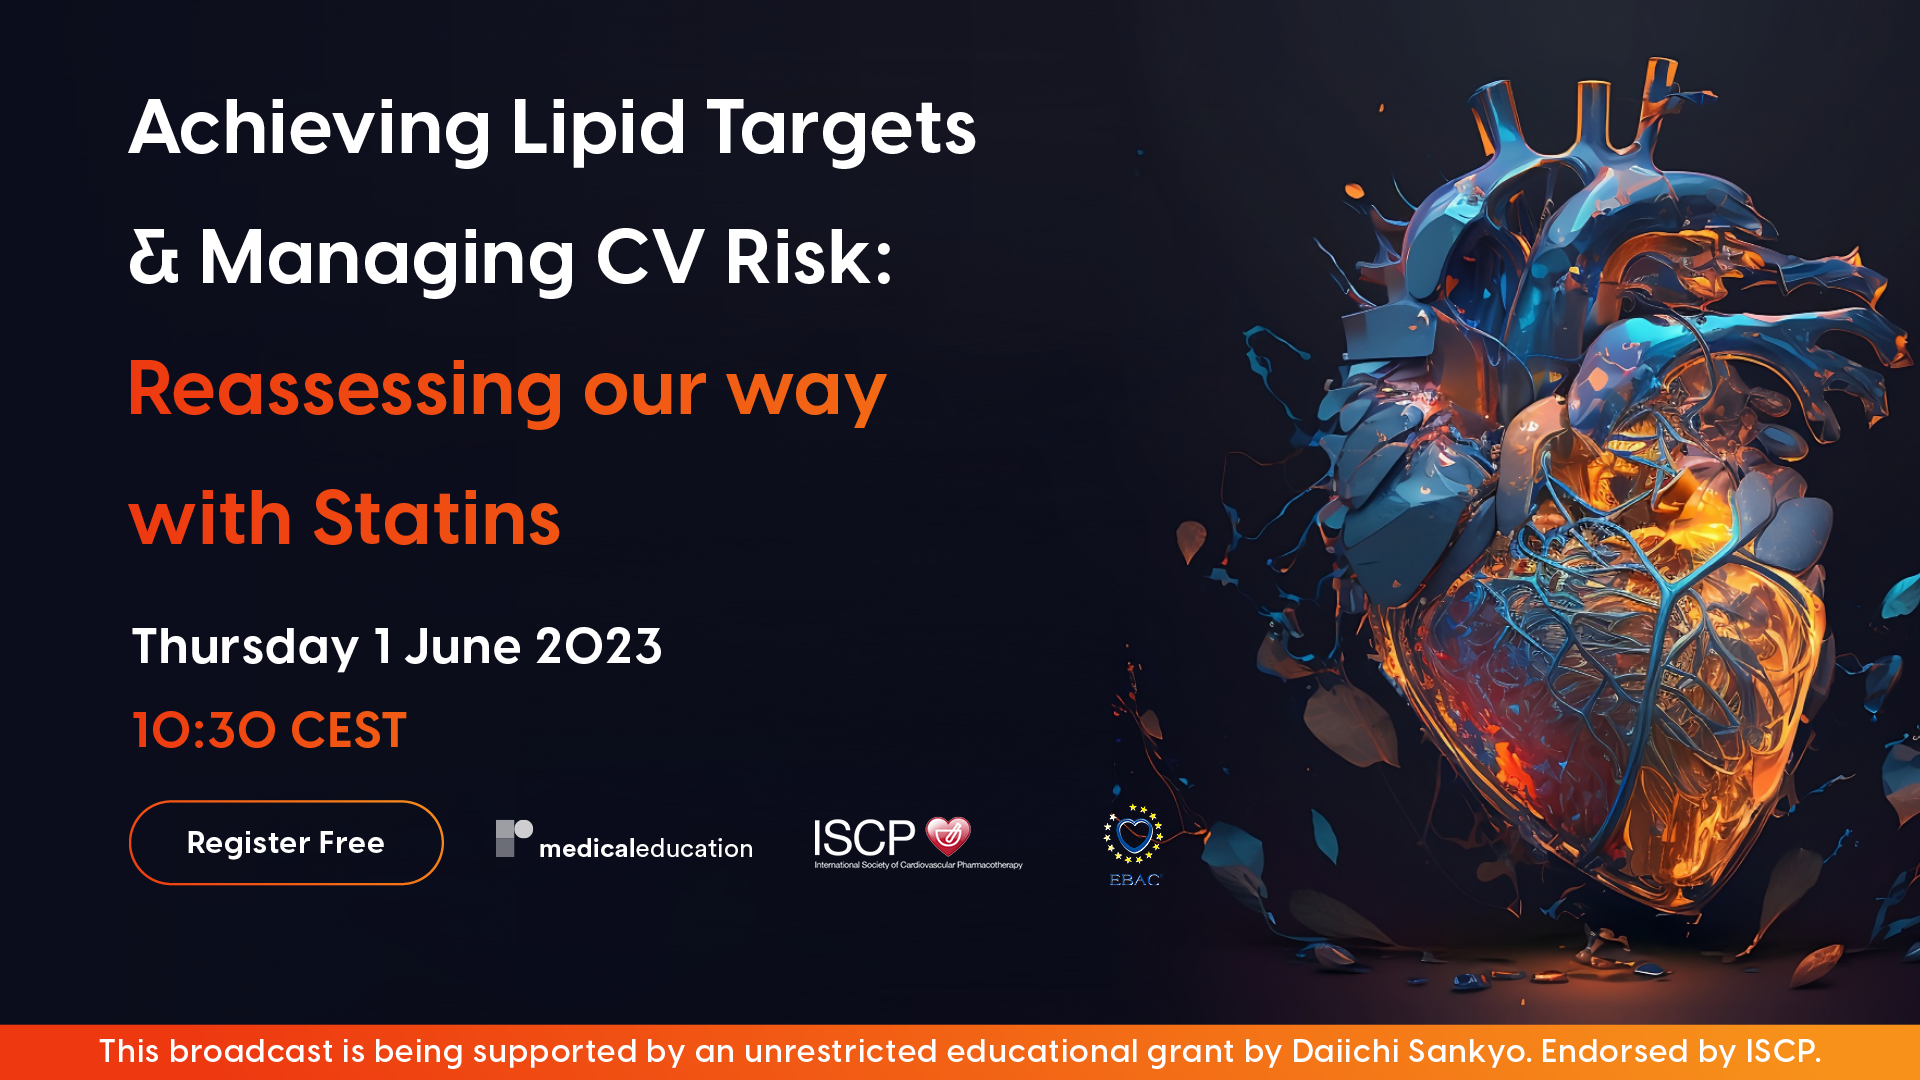 Achieving Lipid Targets & Managing CV Risk: Reassessing our way with Statins